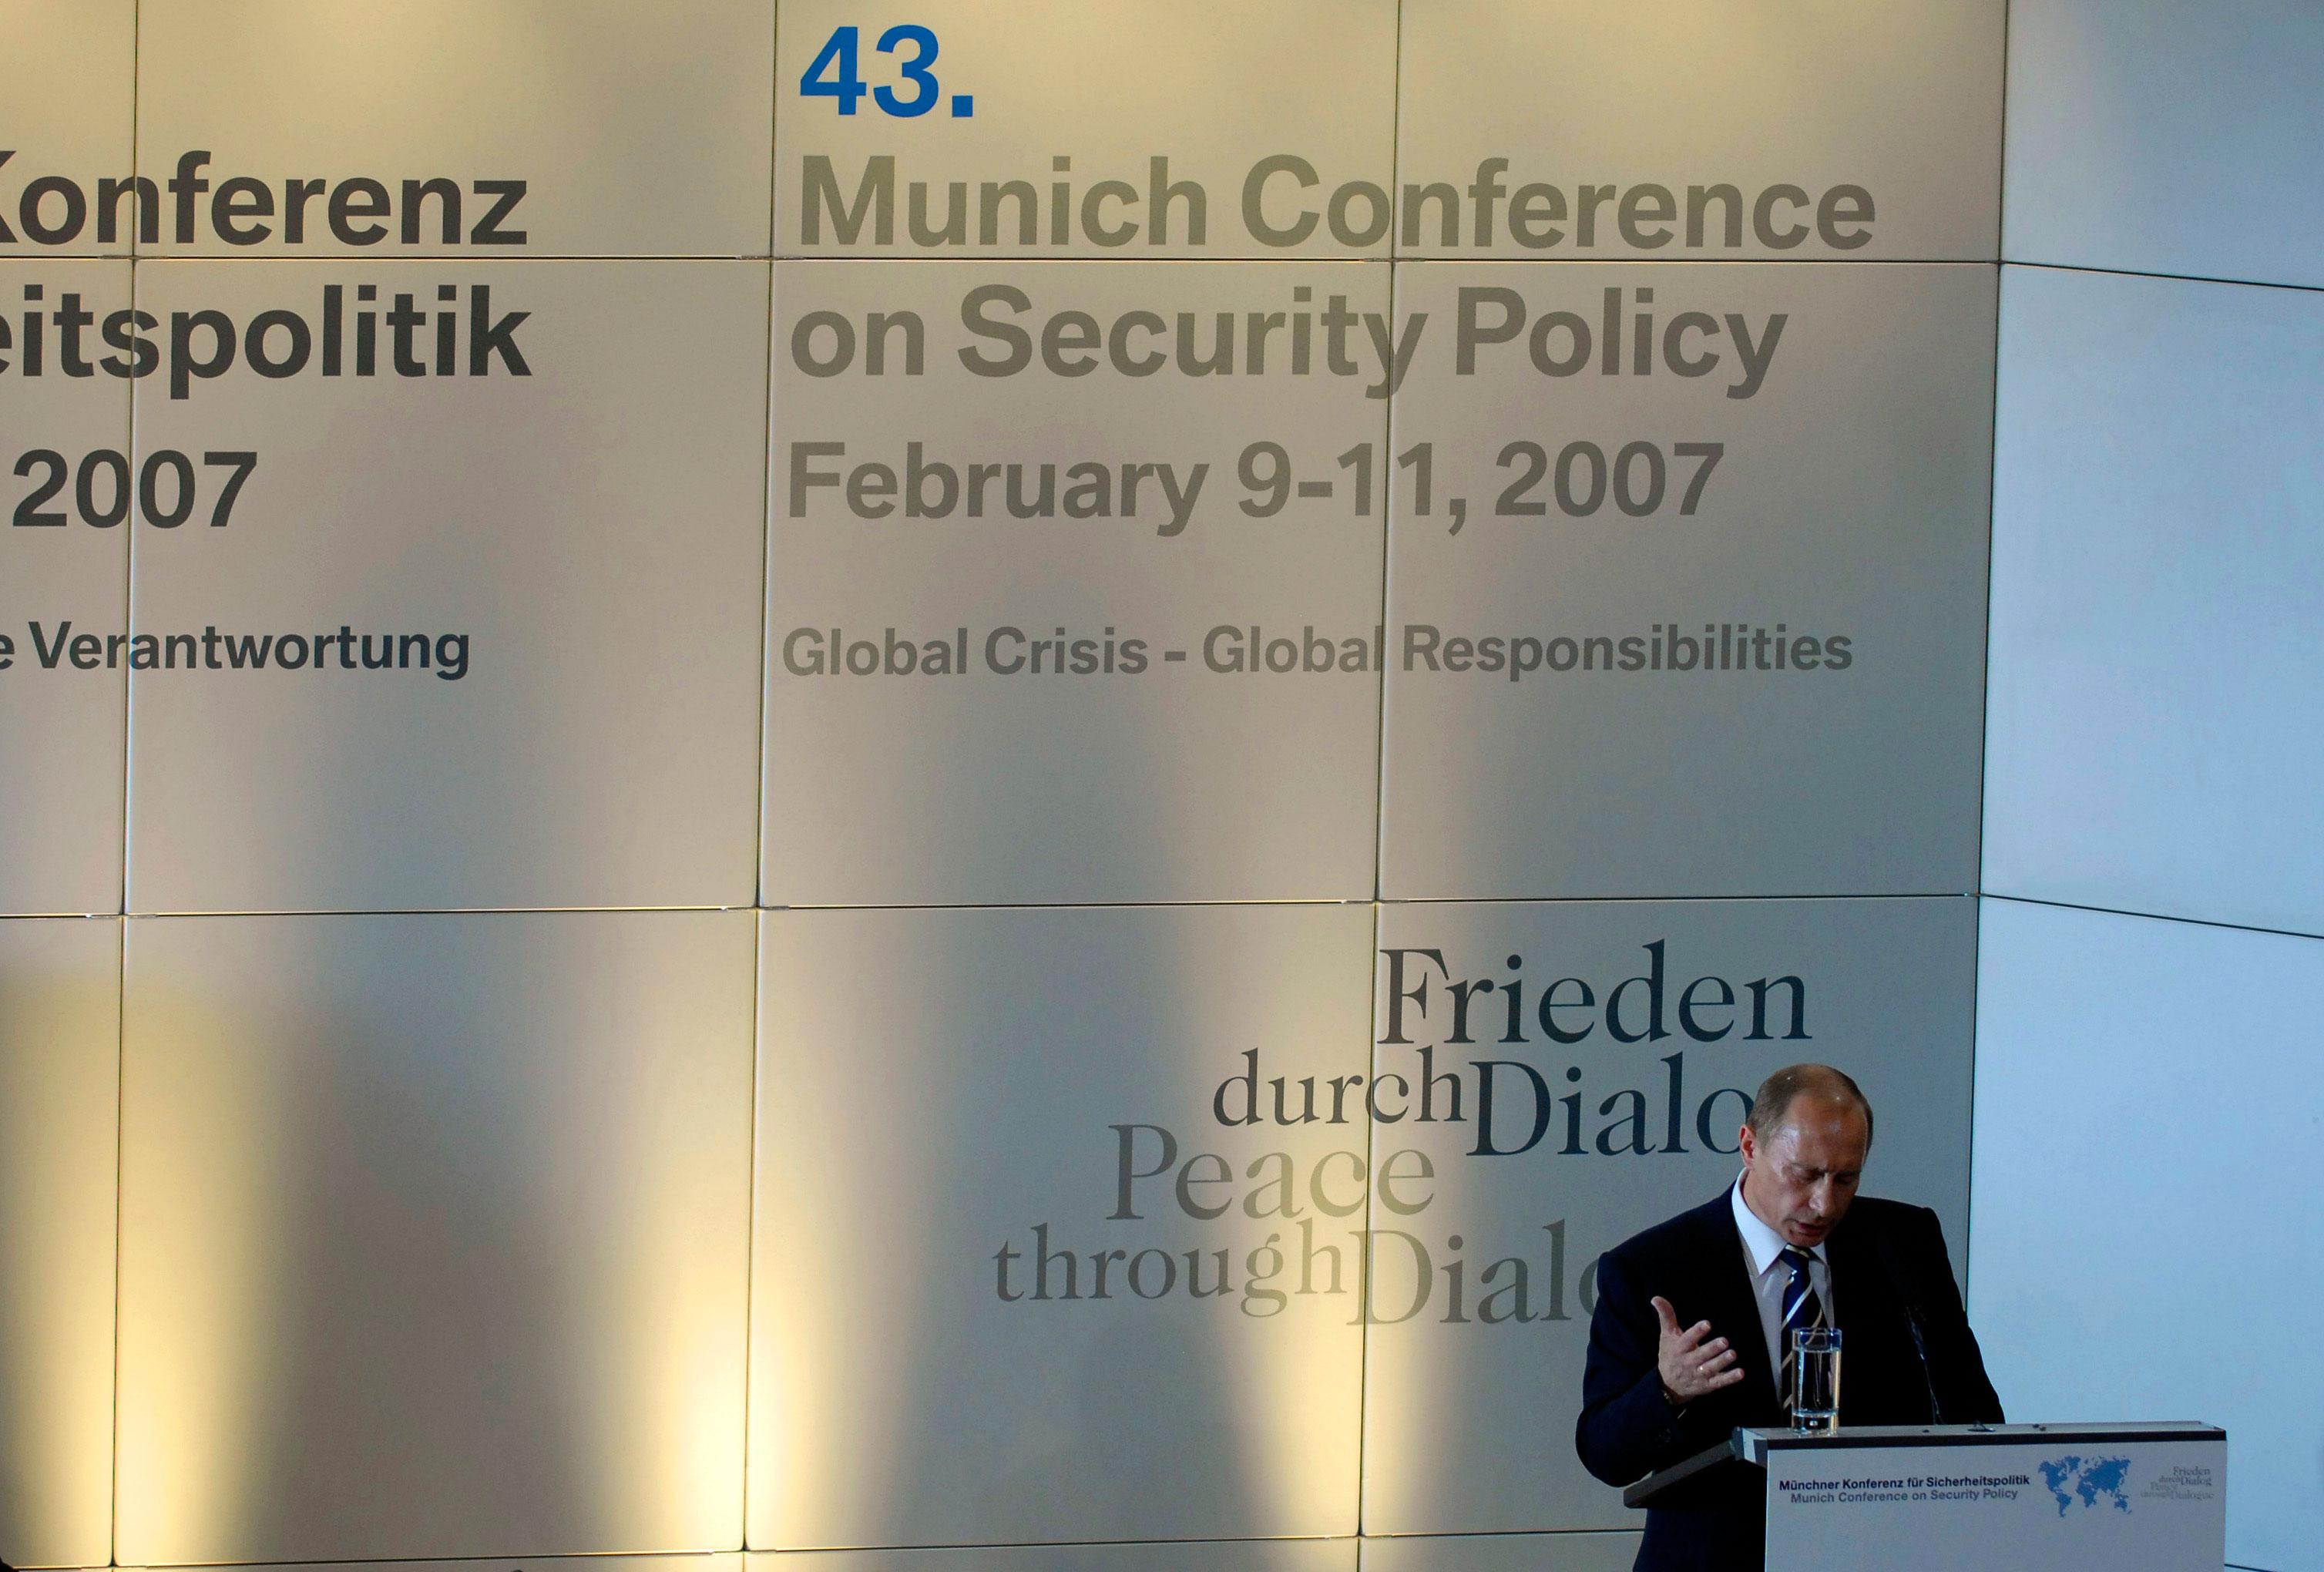 Vladimir Putin speaks at the Munich Security Conference in Germany on 10 February 2007